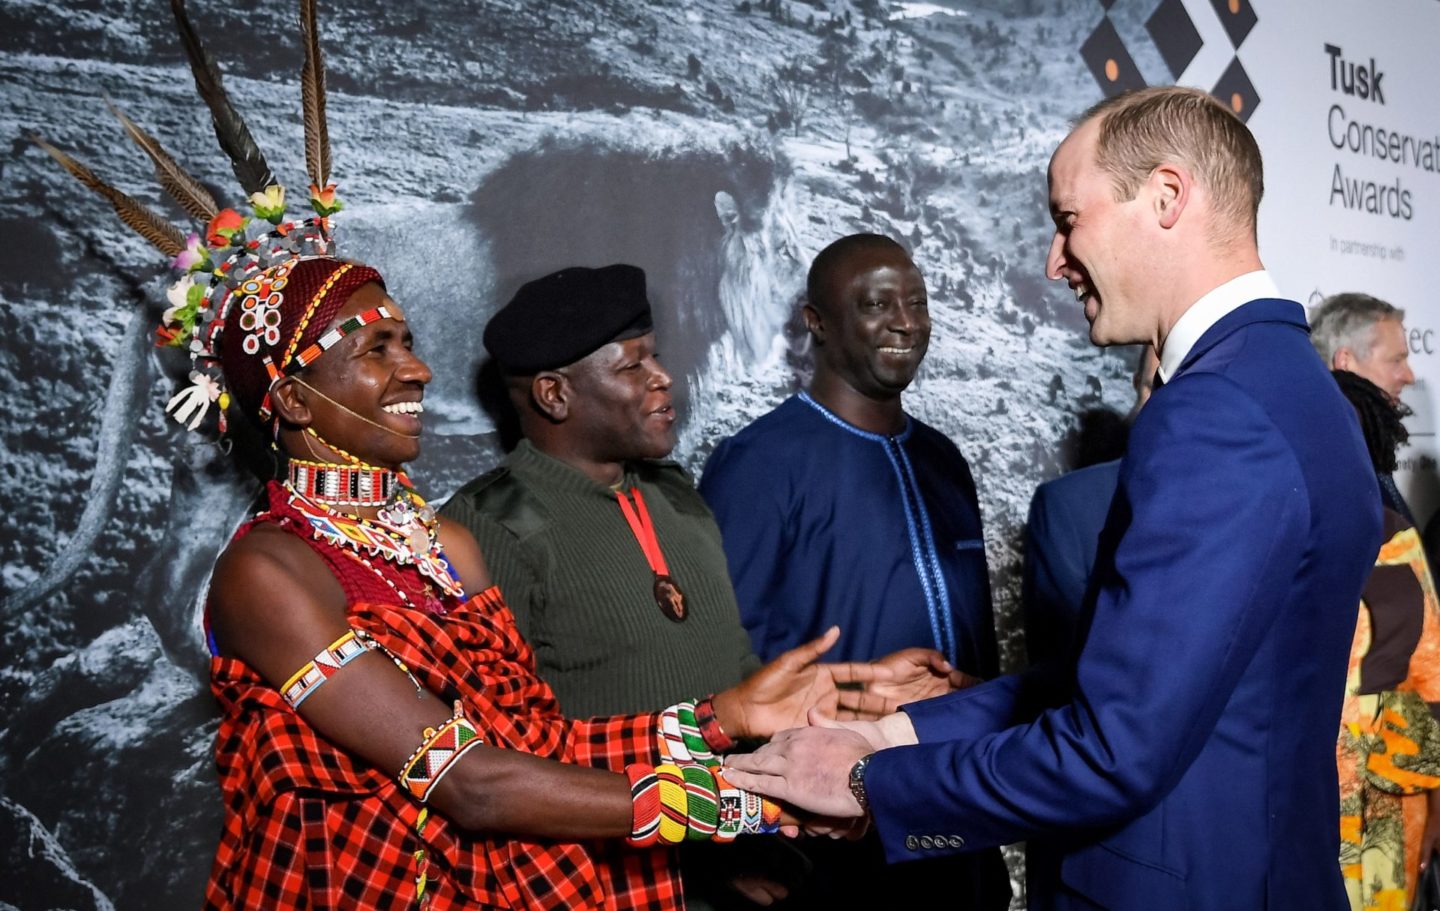 HRH The Duke of Cambridge greets the 2019 Tusk Conservation Awards Finalists